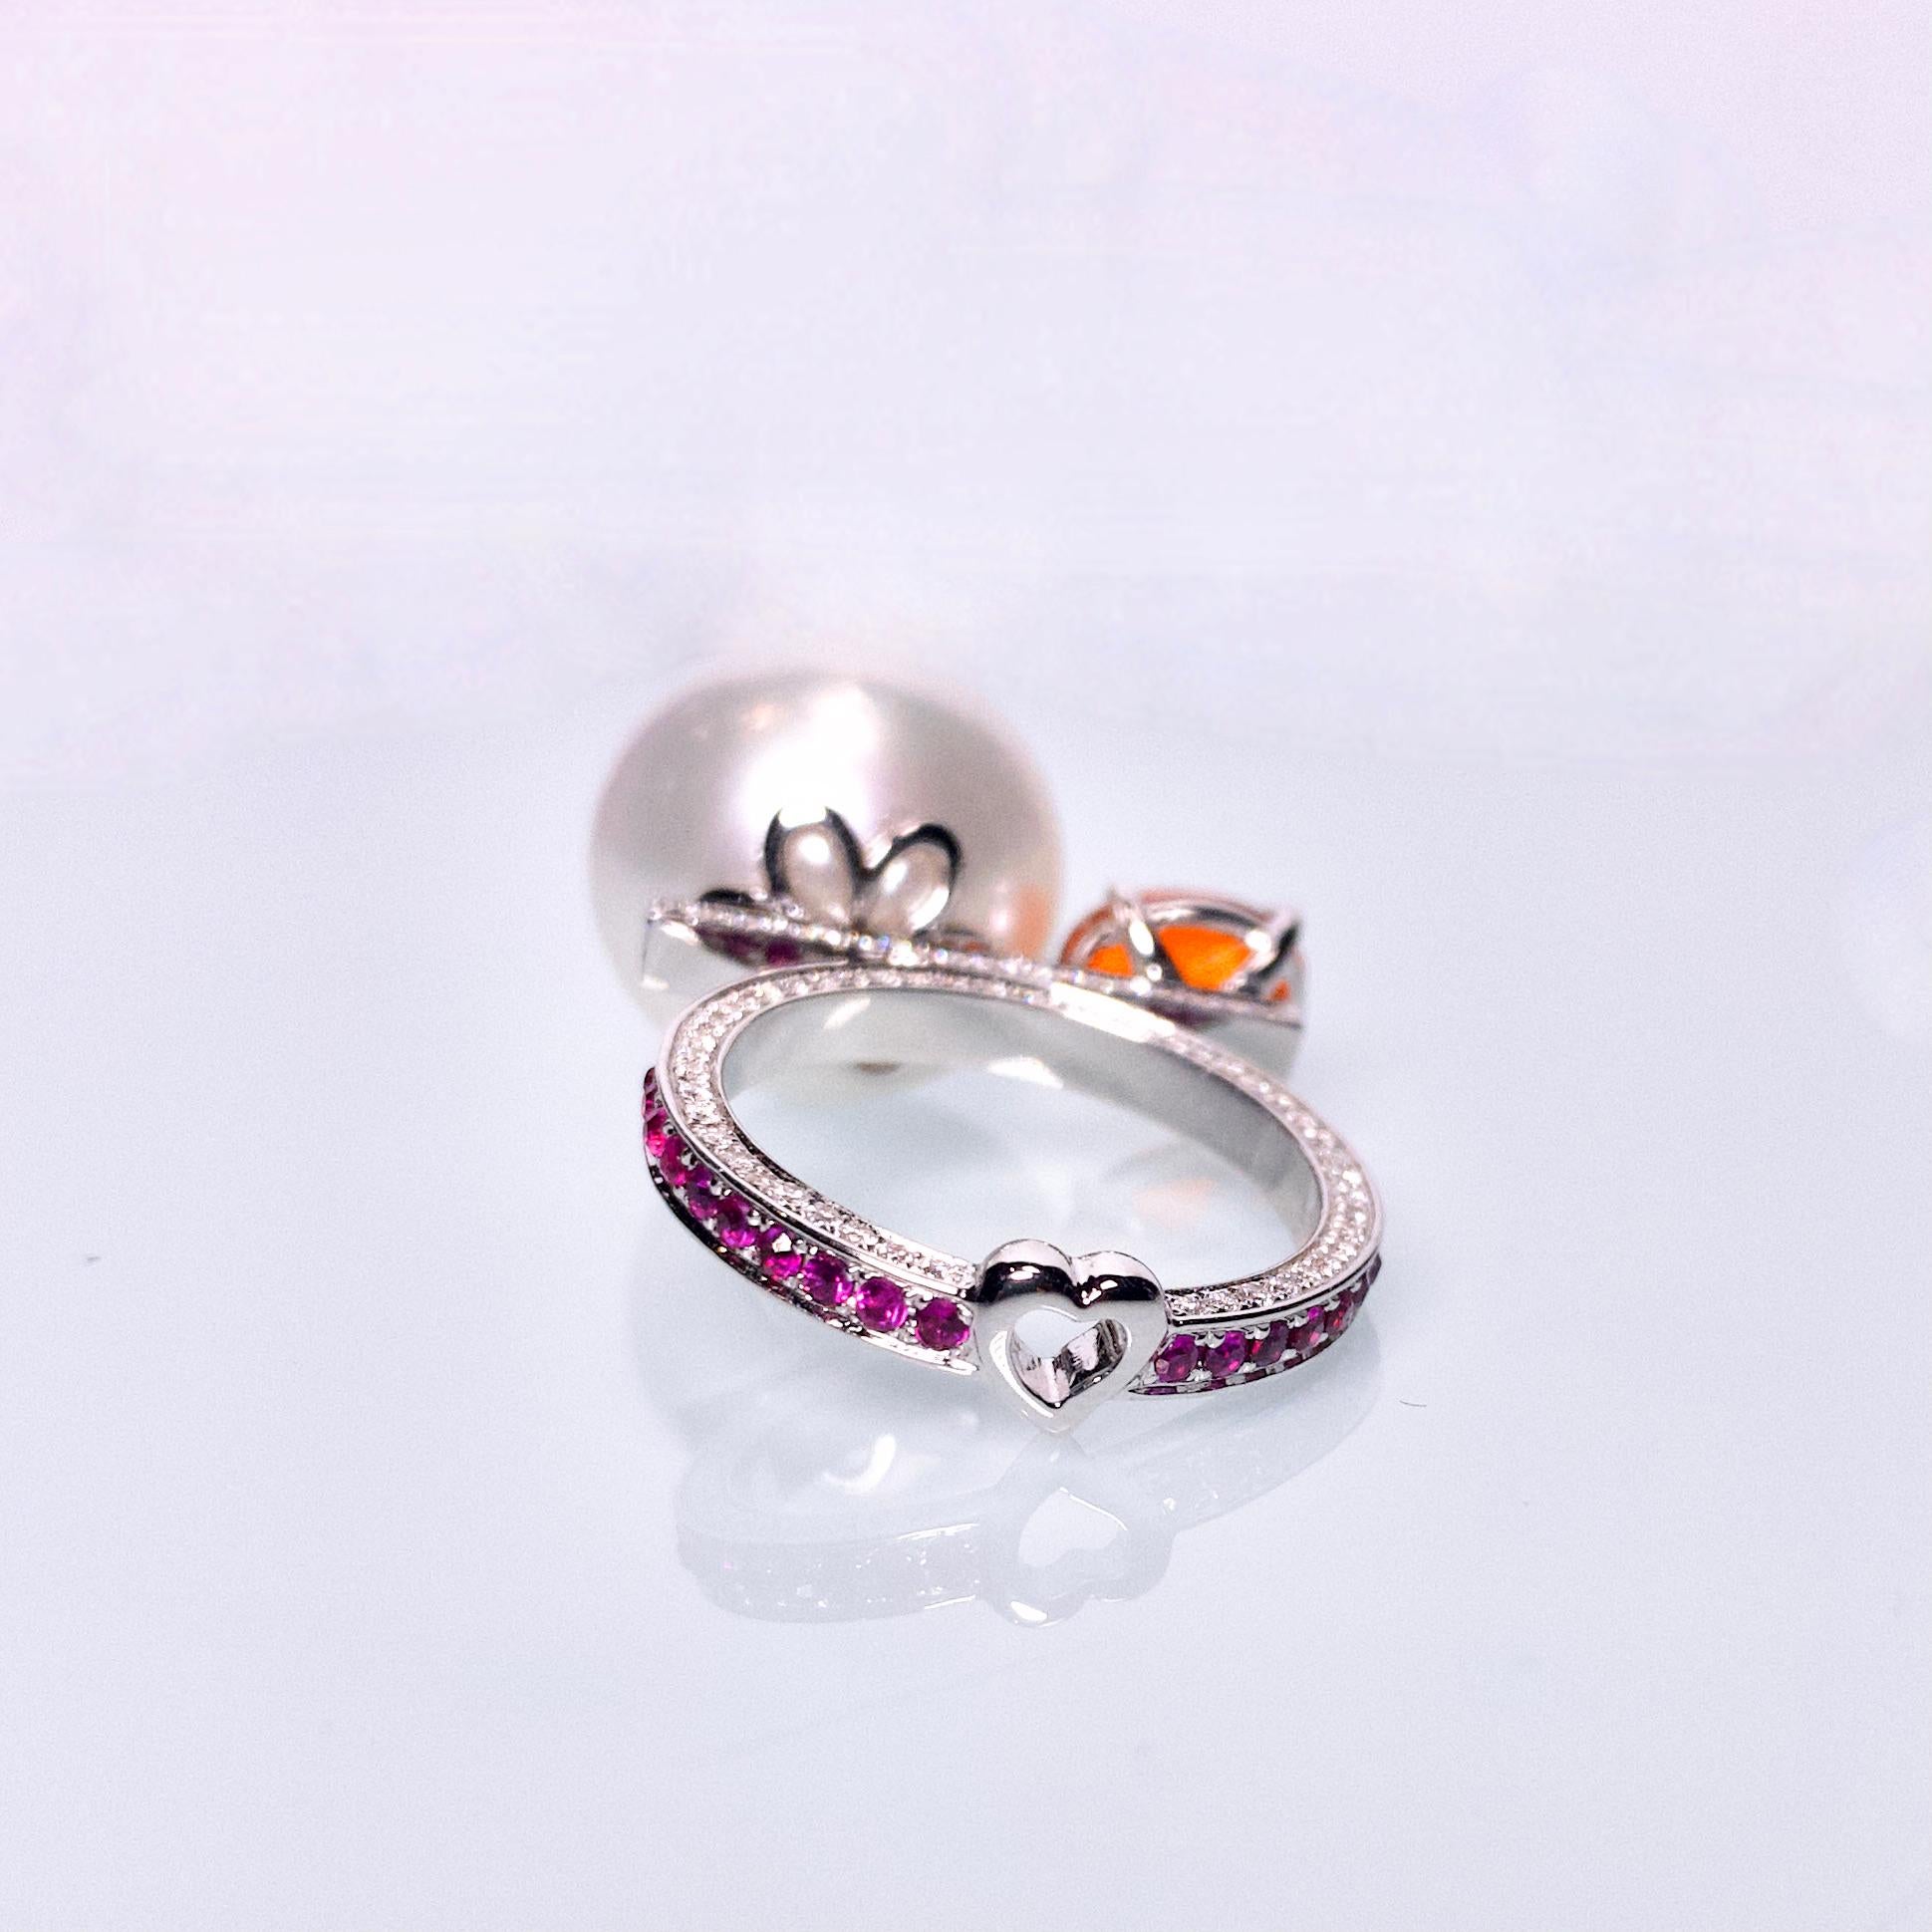 It is a very bold design with pearls and Fire Opal sitting at two ends of a scale. The surface of the ring is full of Diamonds and Rubies pave except for the claws. It is a big and unique cocktail ring and would suit those who love a big loud ring.